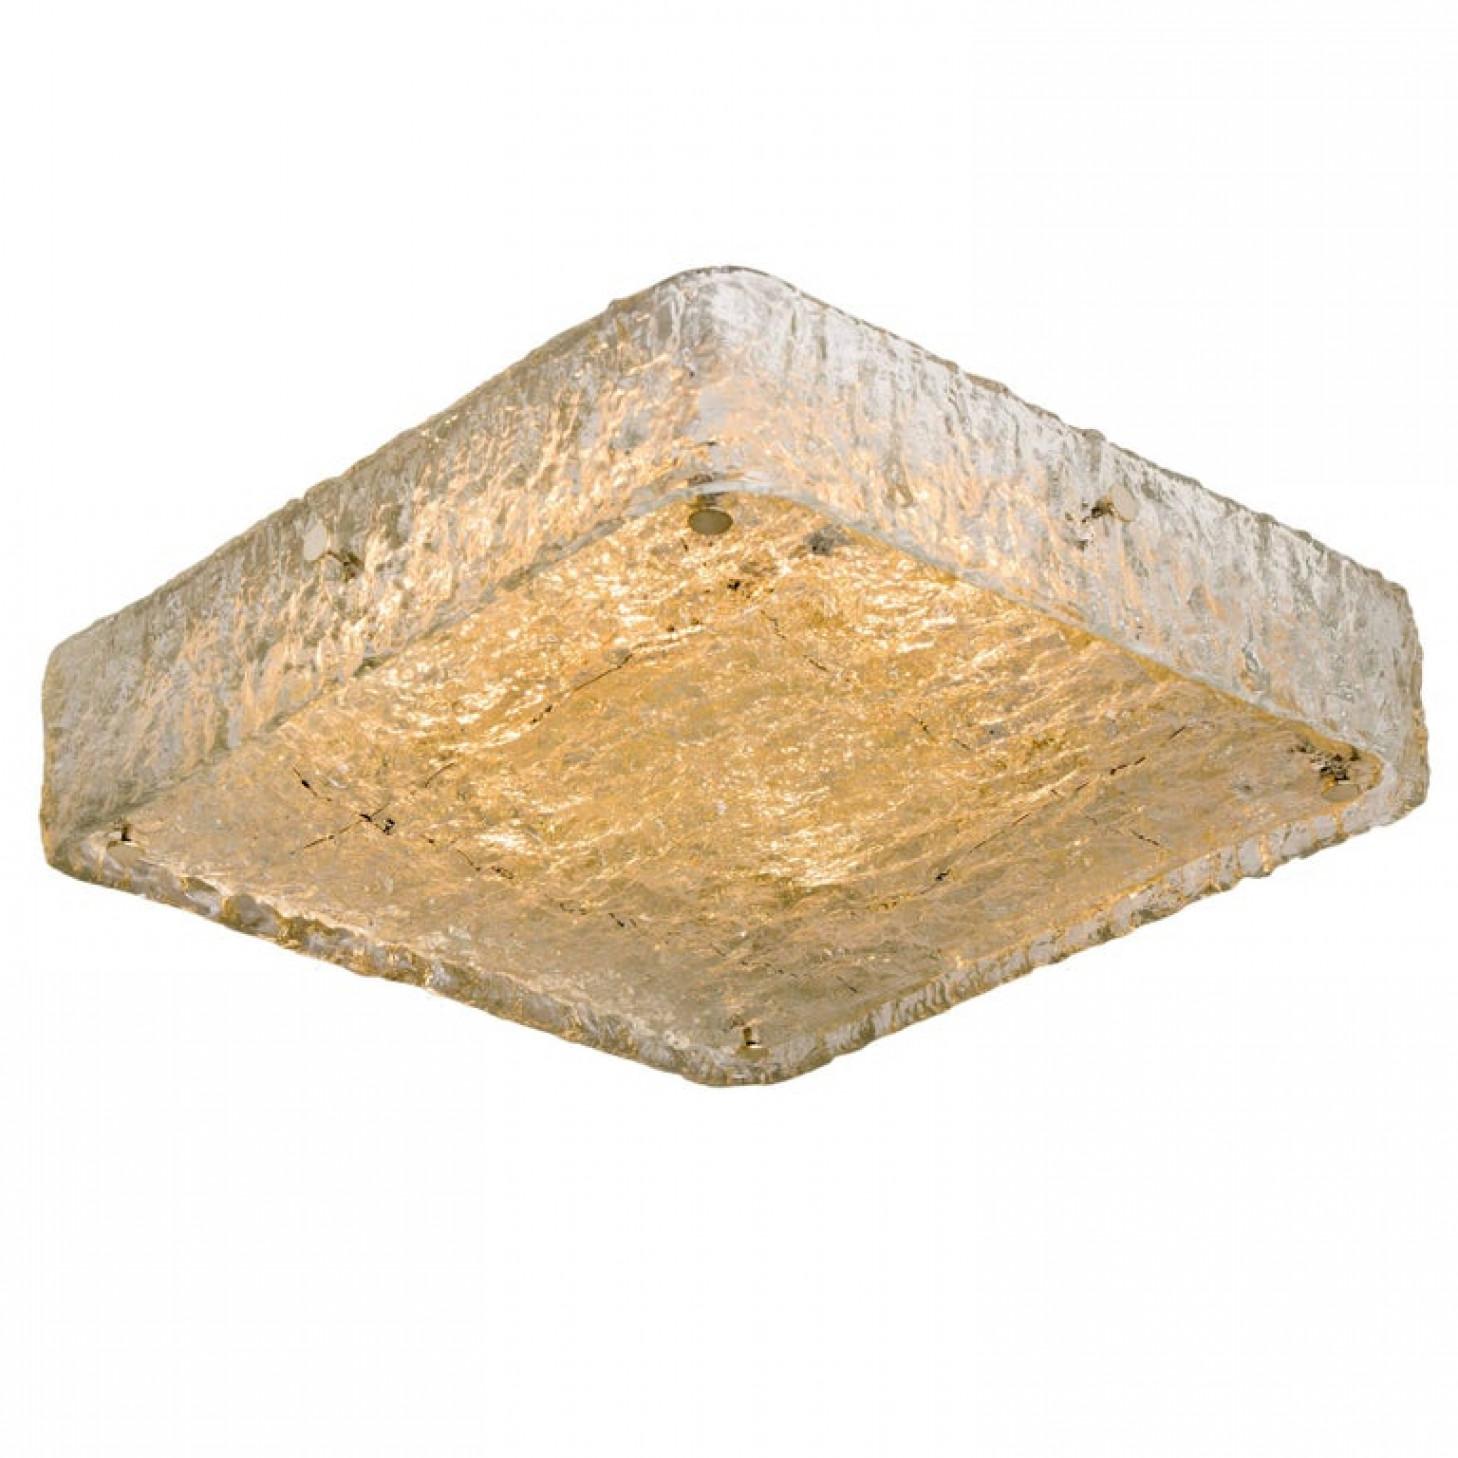 1 of the 3 handmade high quality light fixture made by J.T. Kaiser, Austria, manufactured in midcentury, circa 1970 (at the end of 1960s and beginning of 1970s).

This flushmount or ceiling light features four sheets made of handmade, think textured